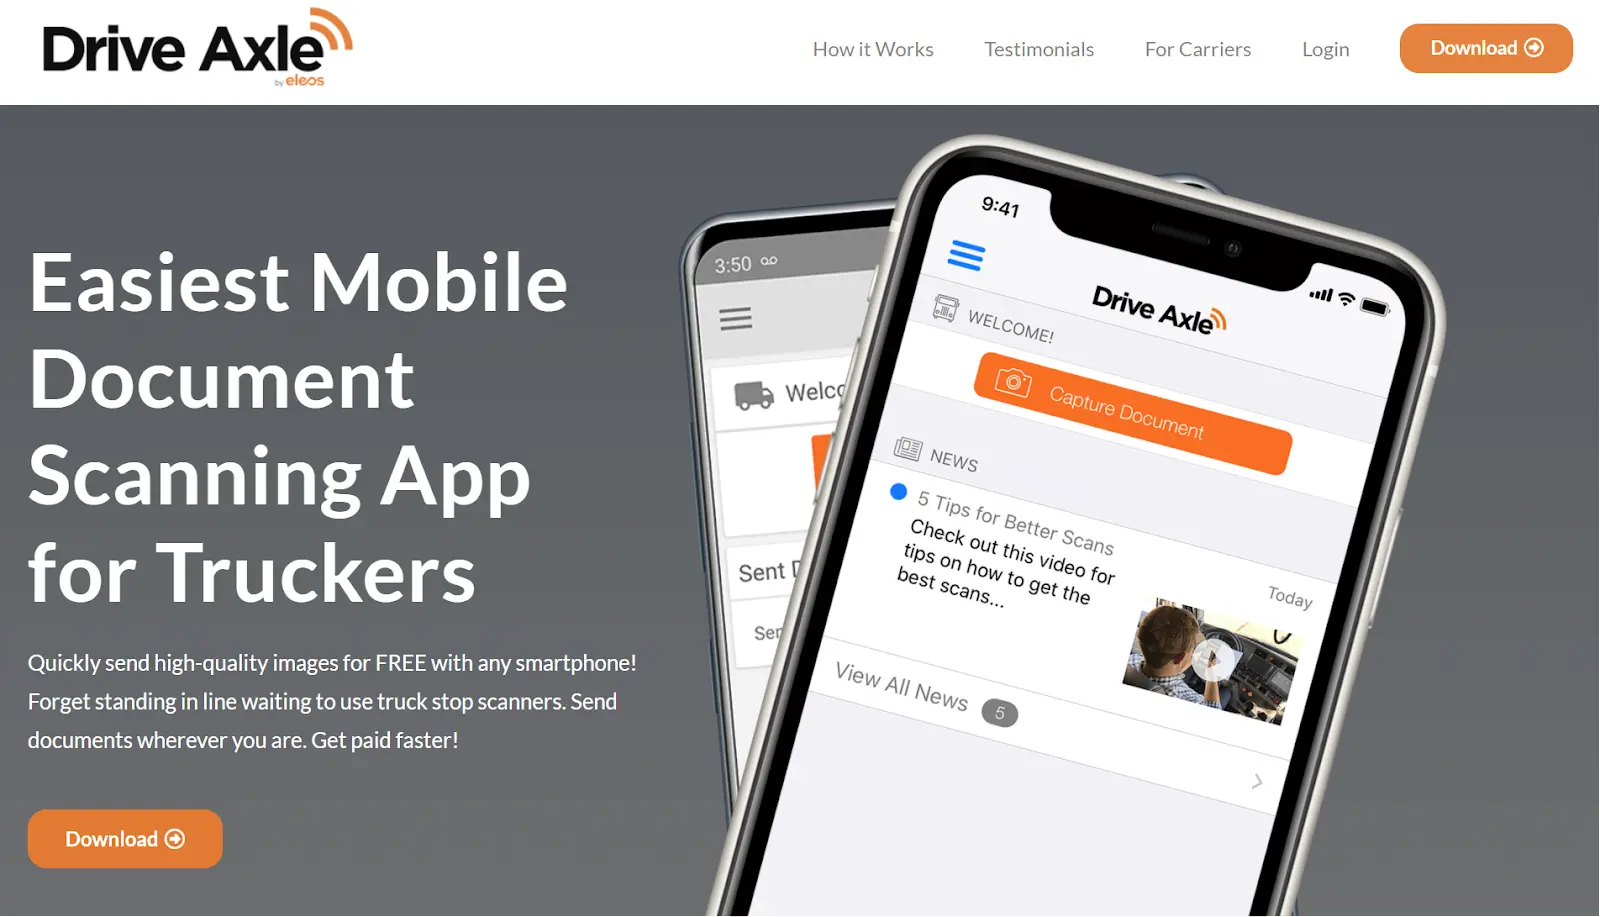 Drive Axle—mobile app best for sending freight documents